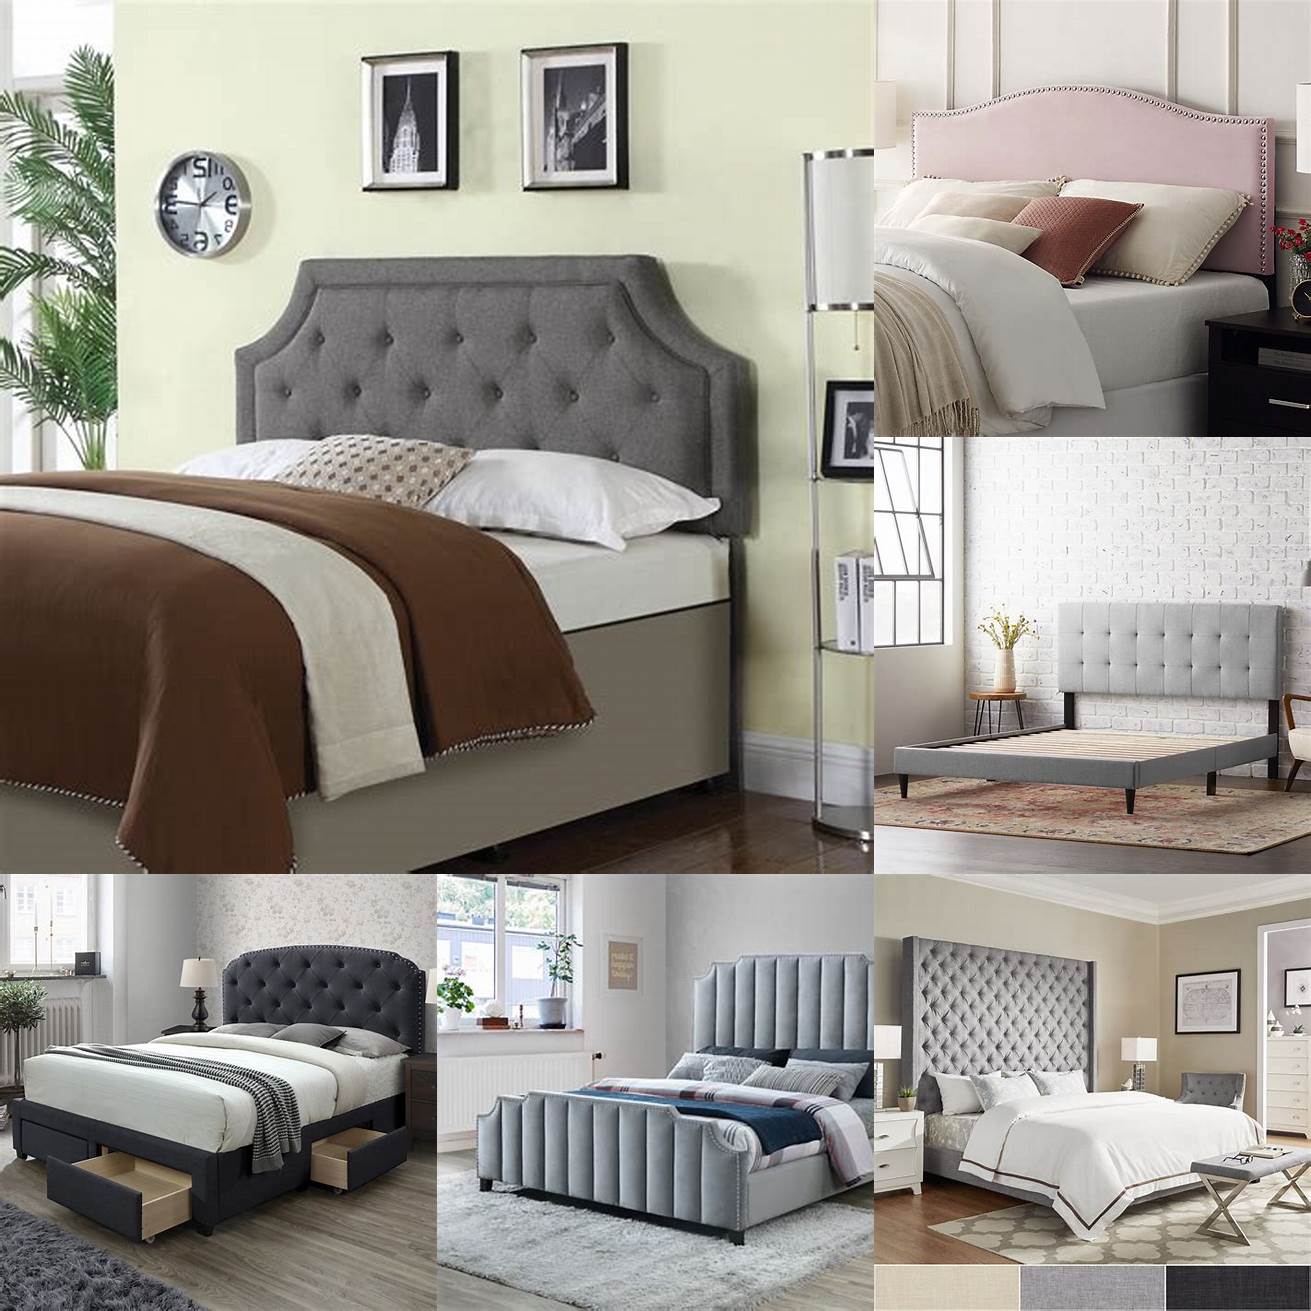 Weight The padded headboard and frame can be heavy and difficult to move making it challenging to rearrange your bedroom furniture